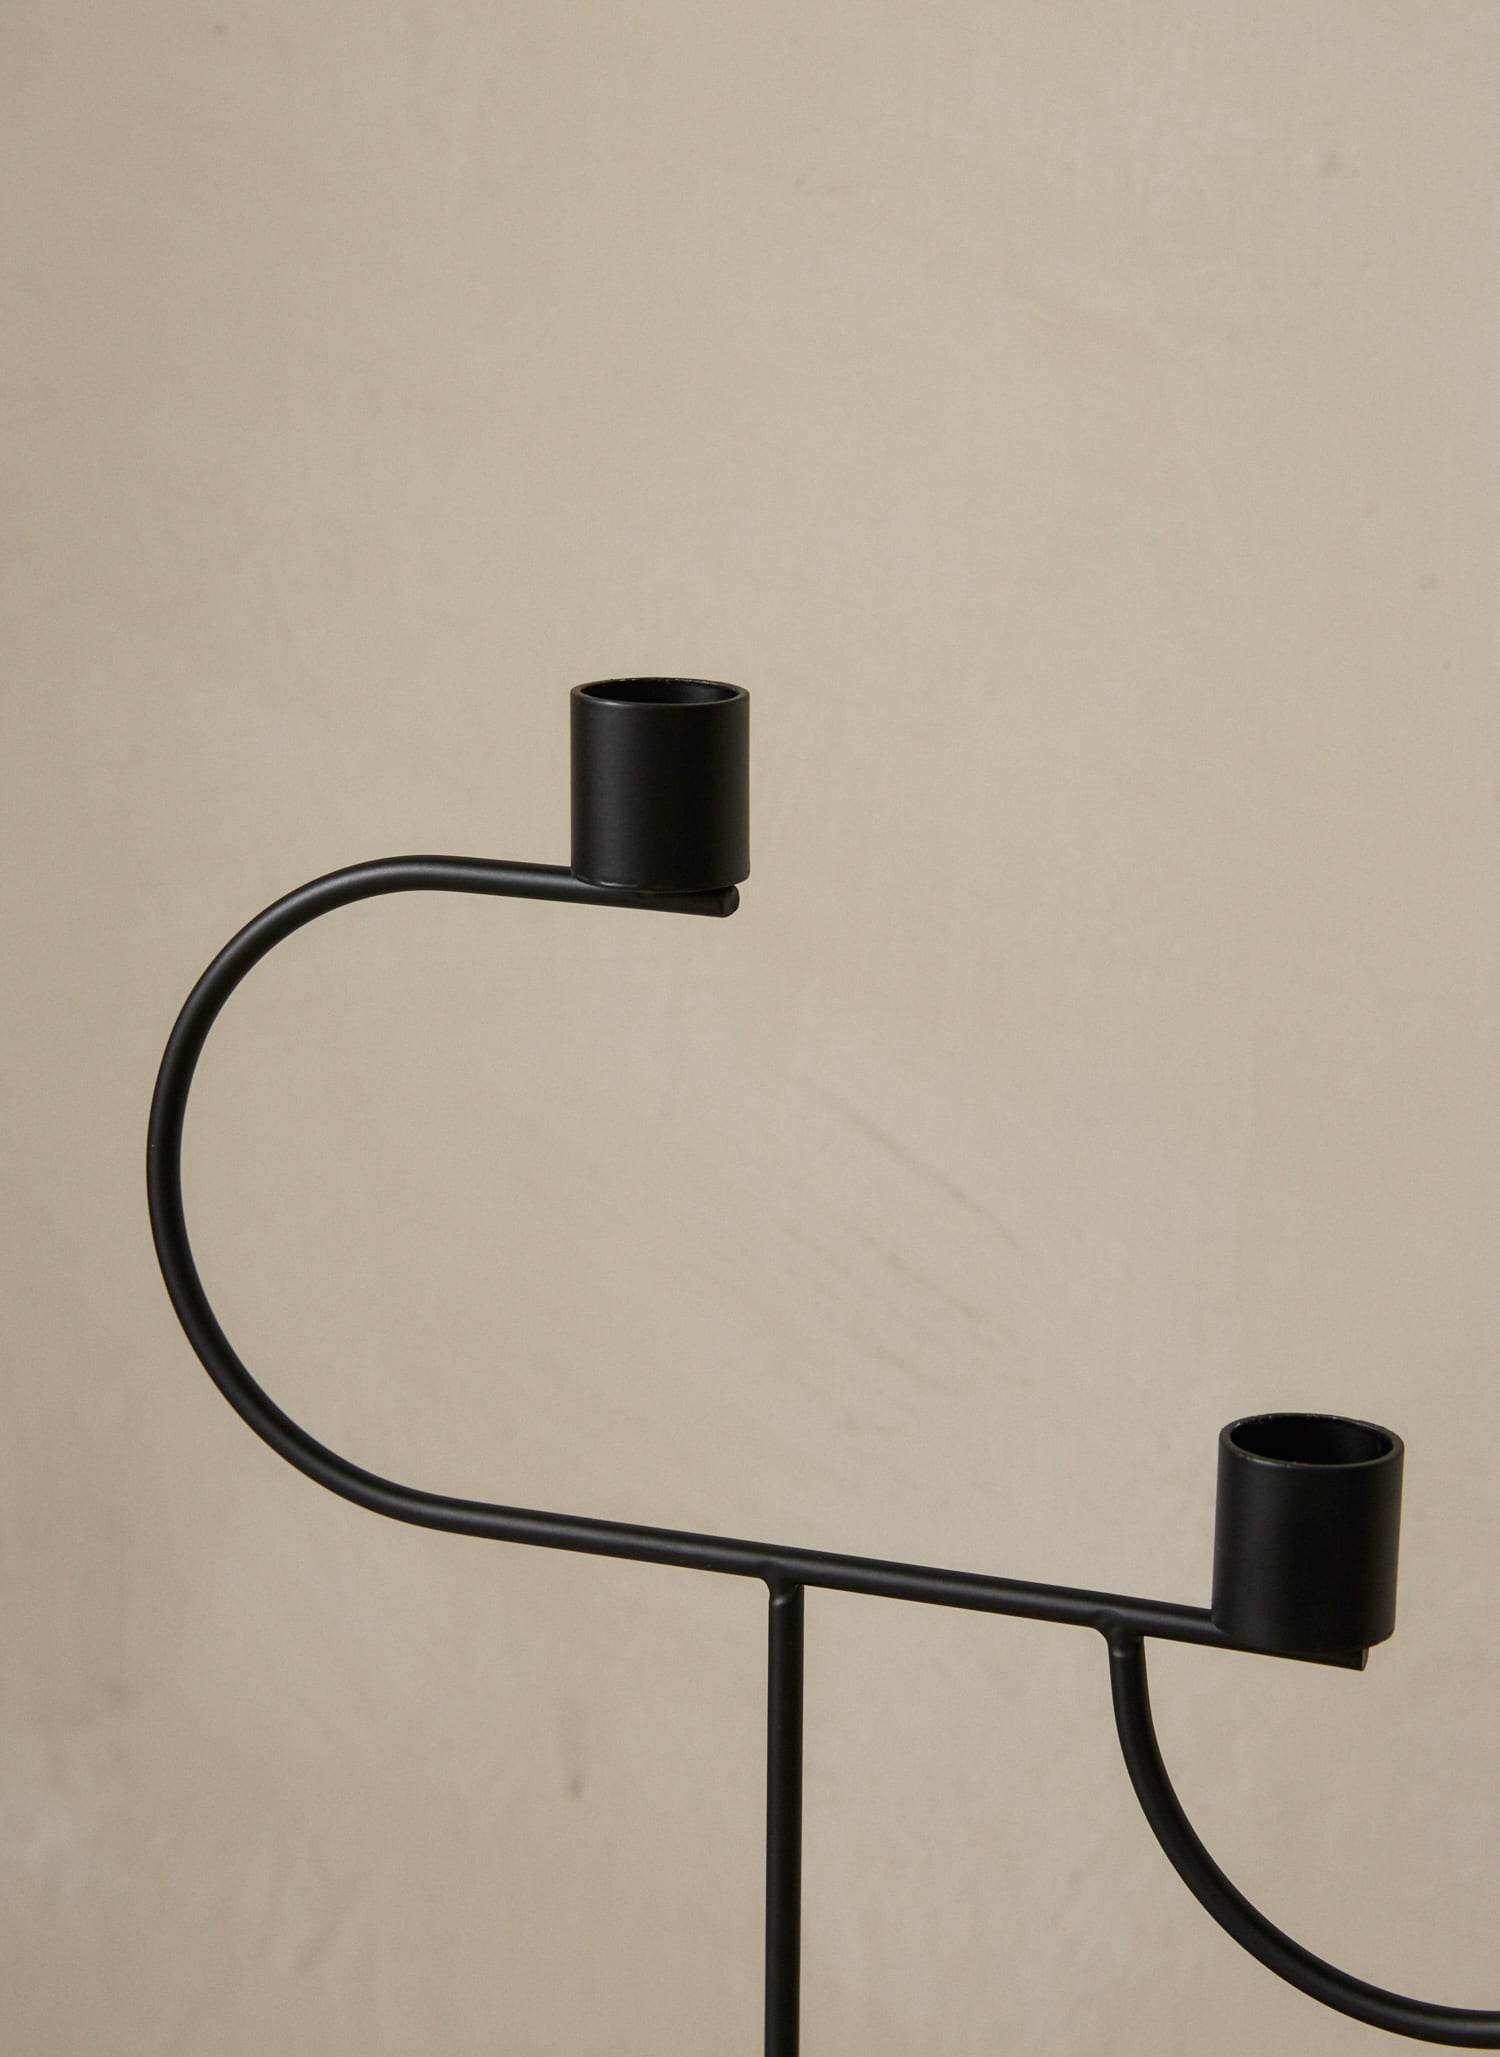 Avant Candelabra. An expression of balance, this modern, geometric candelabra features a voluminous cone base and three candle holders in black powder coated metal with a smooth finish. 